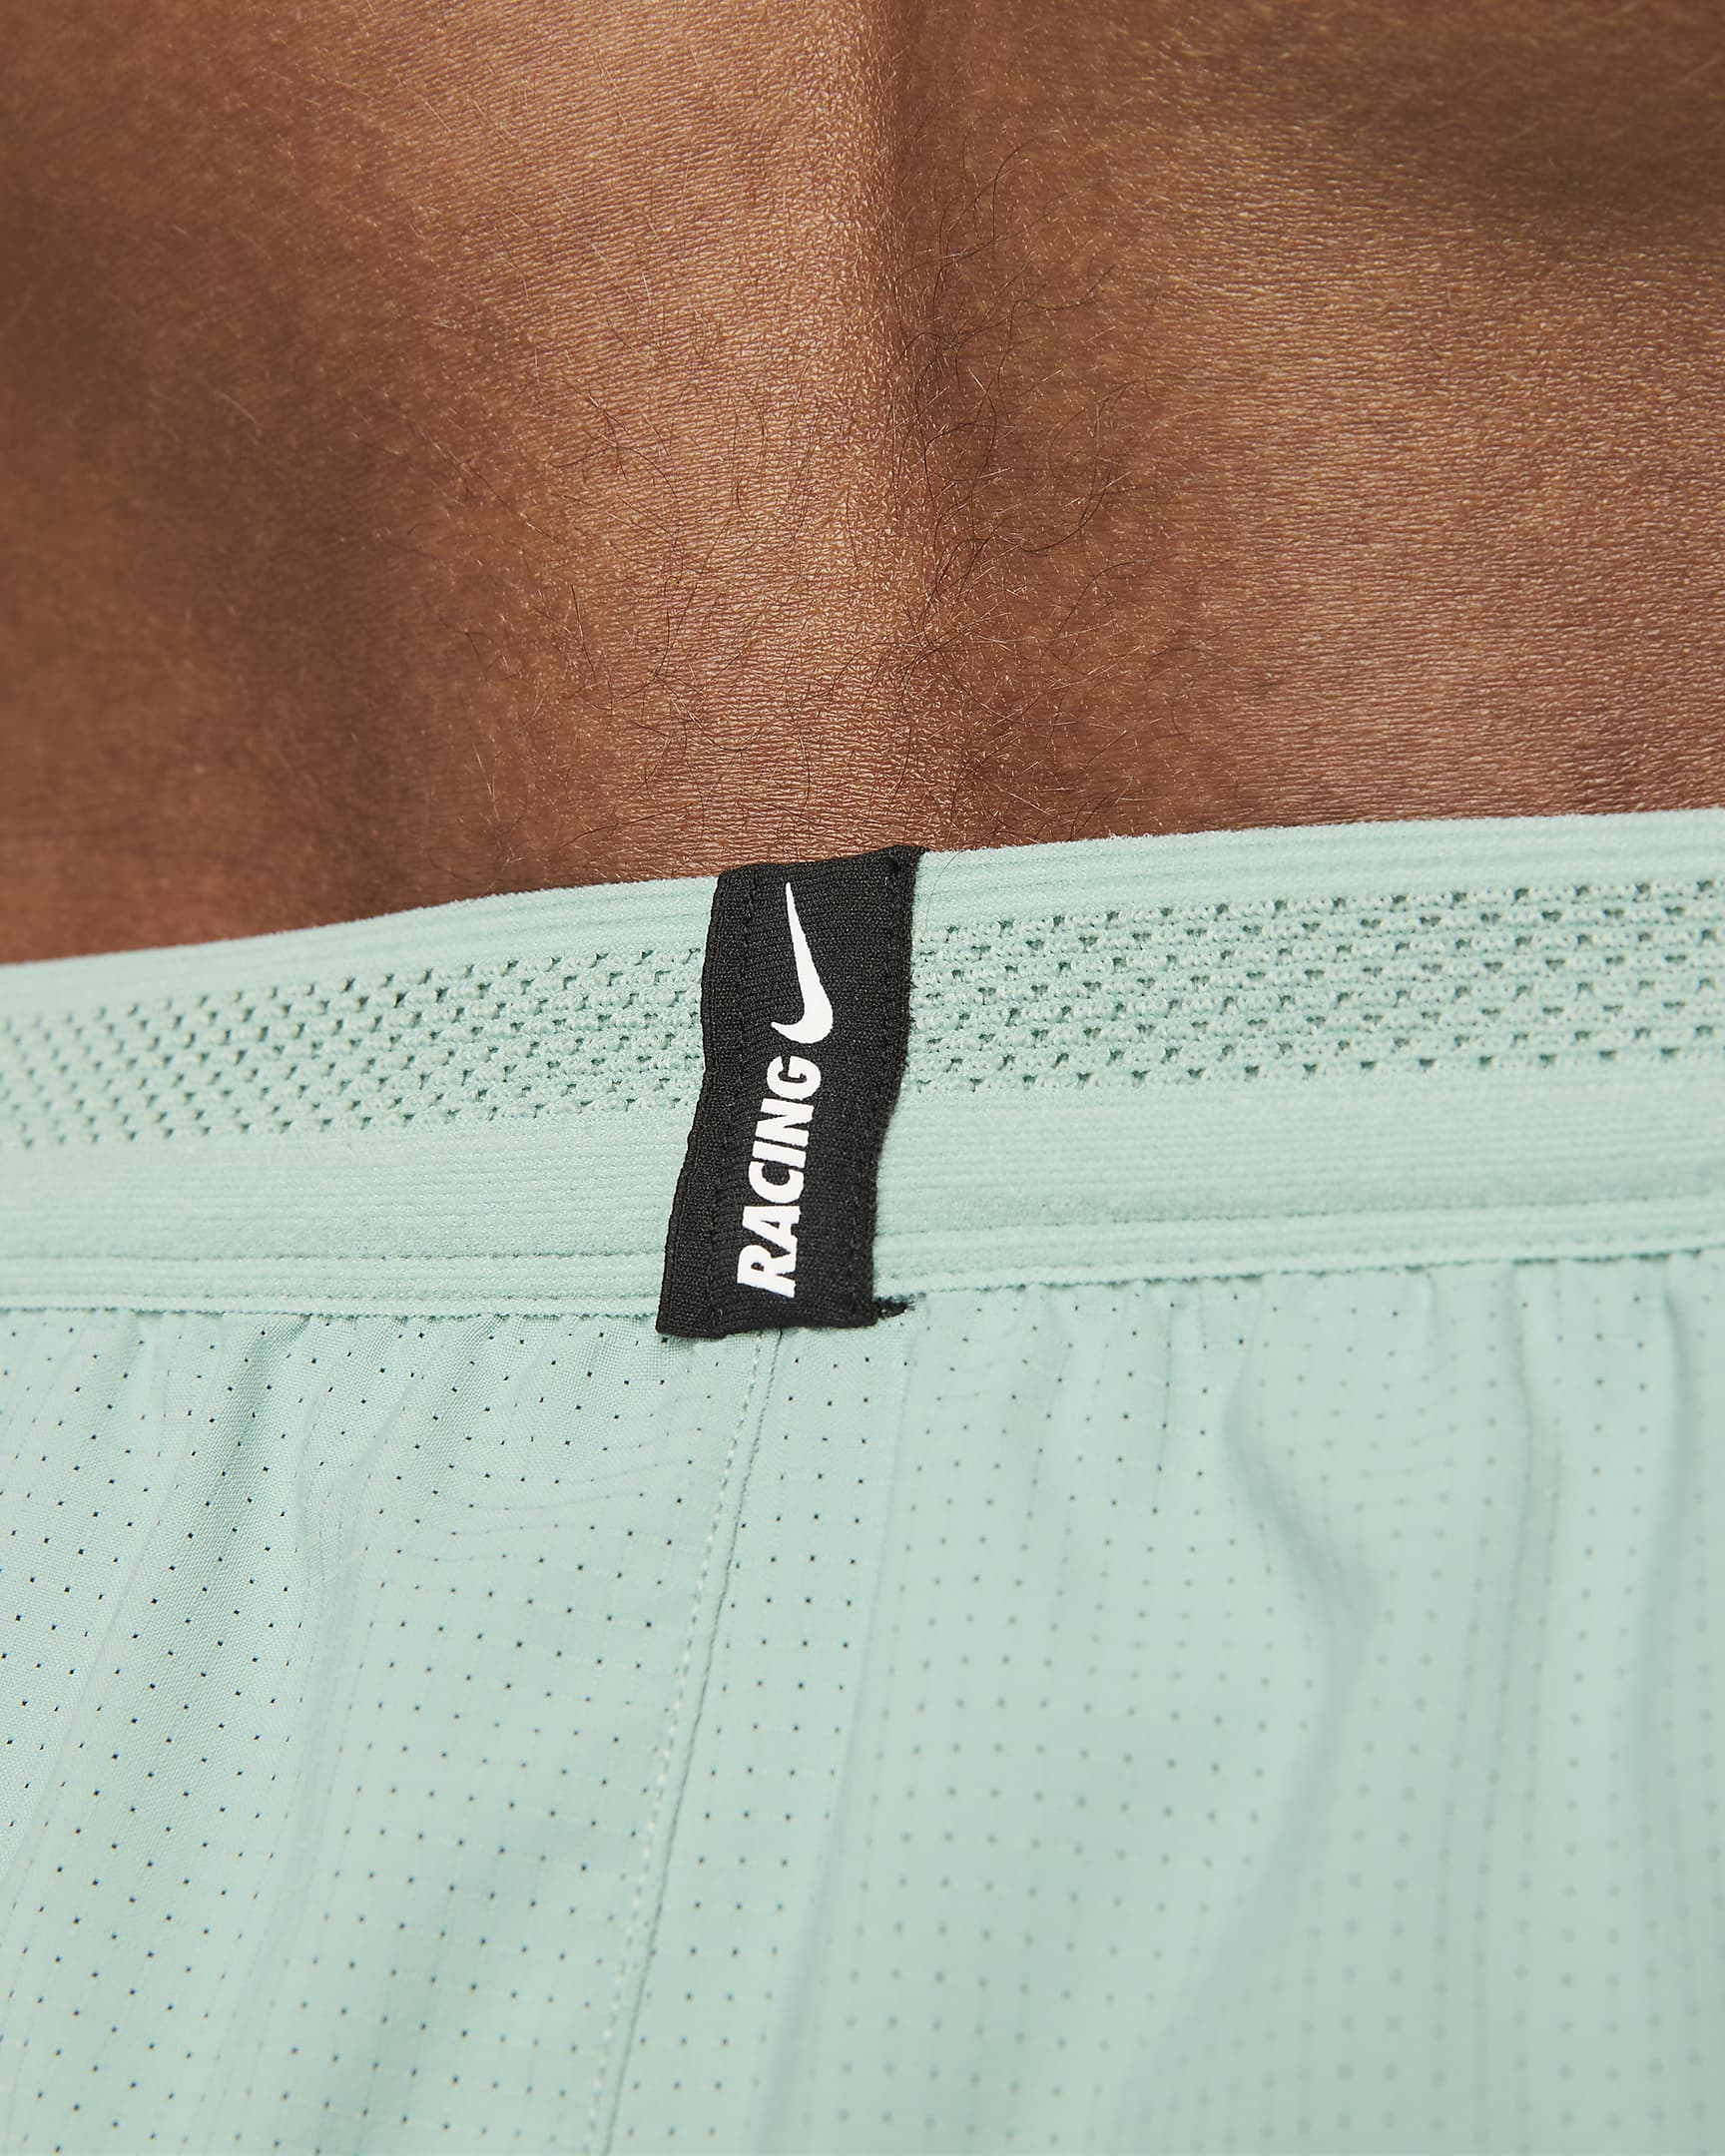 Nike AeroSwift Men's 5cm (approx.) Brief-Lined Racing Shorts - Mineral/Black